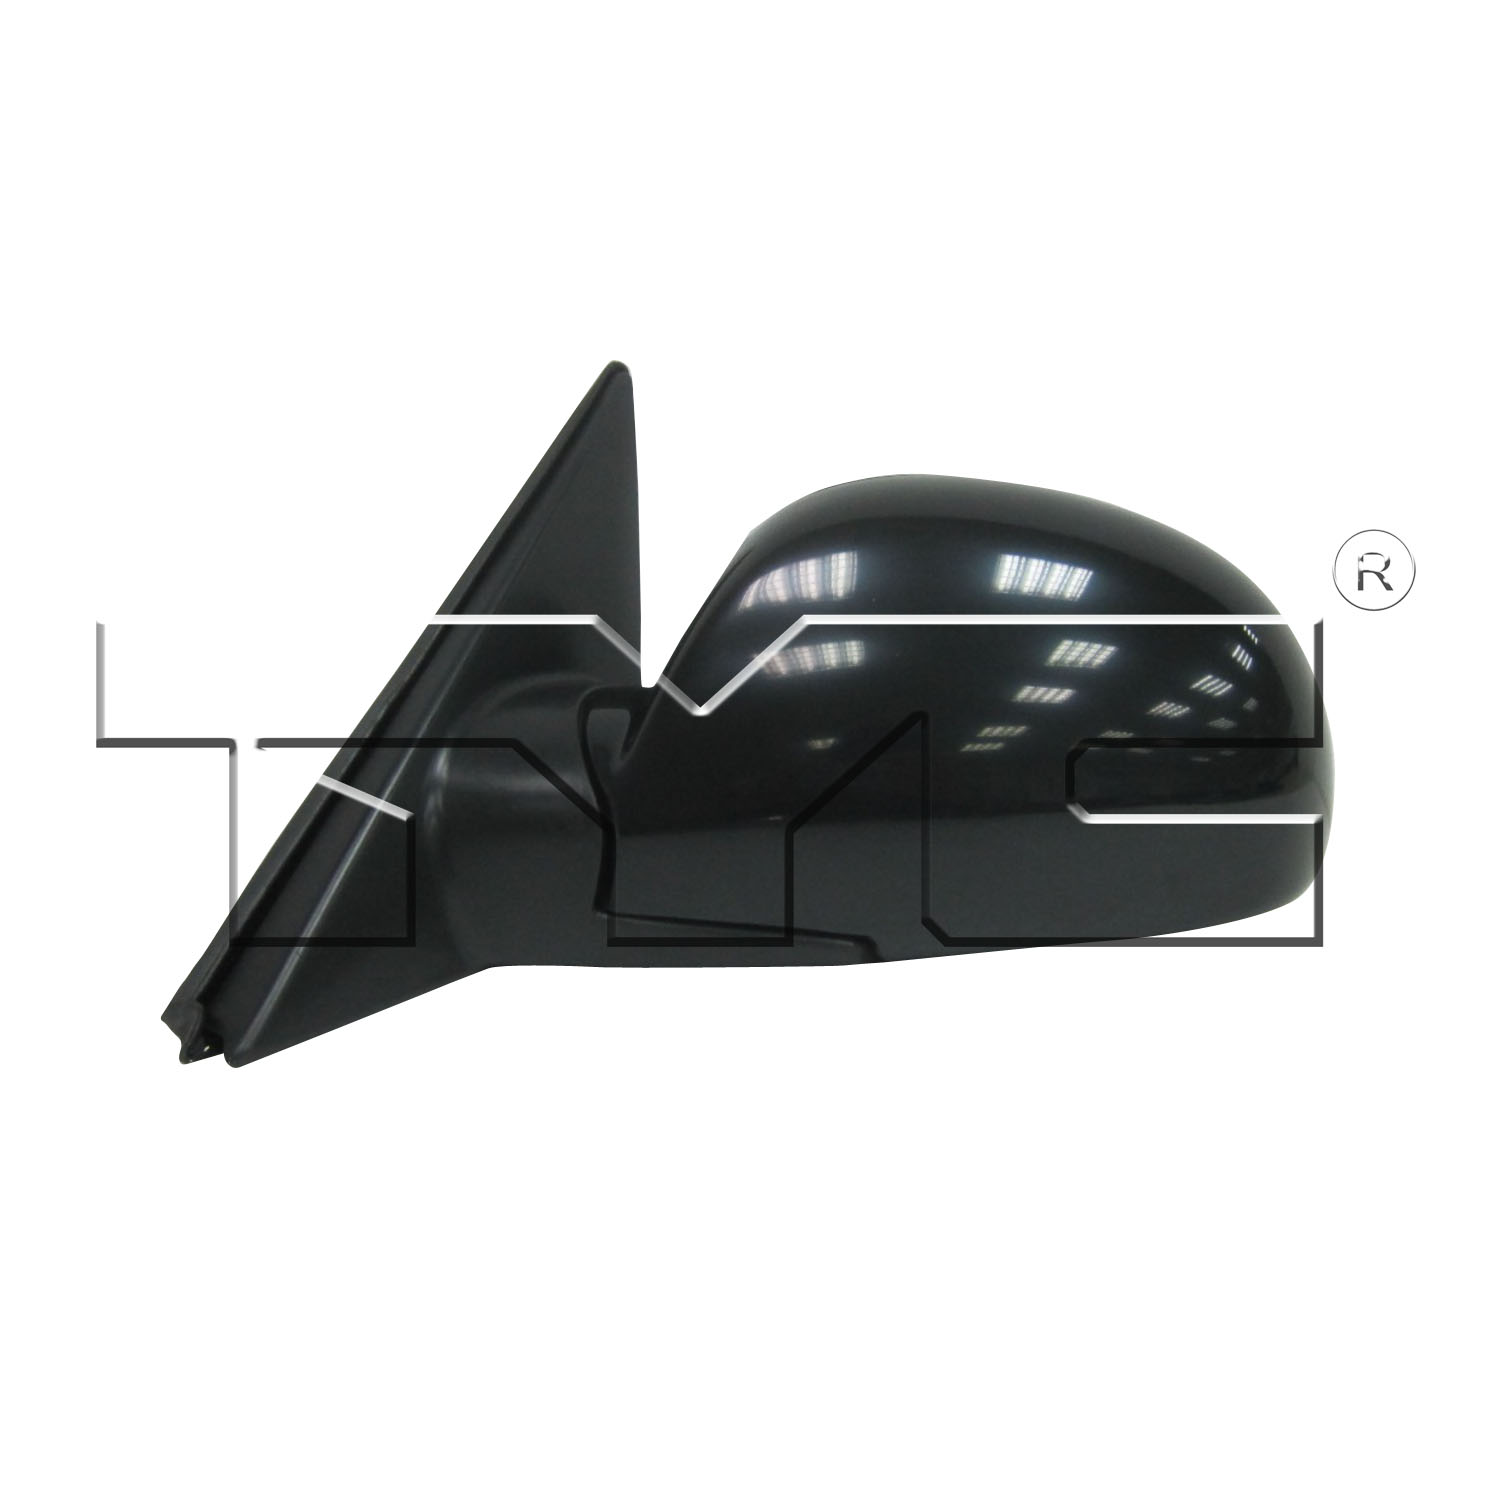 Aftermarket MIRRORS for HYUNDAI - ACCENT, ACCENT,02-06,LT Mirror outside rear view